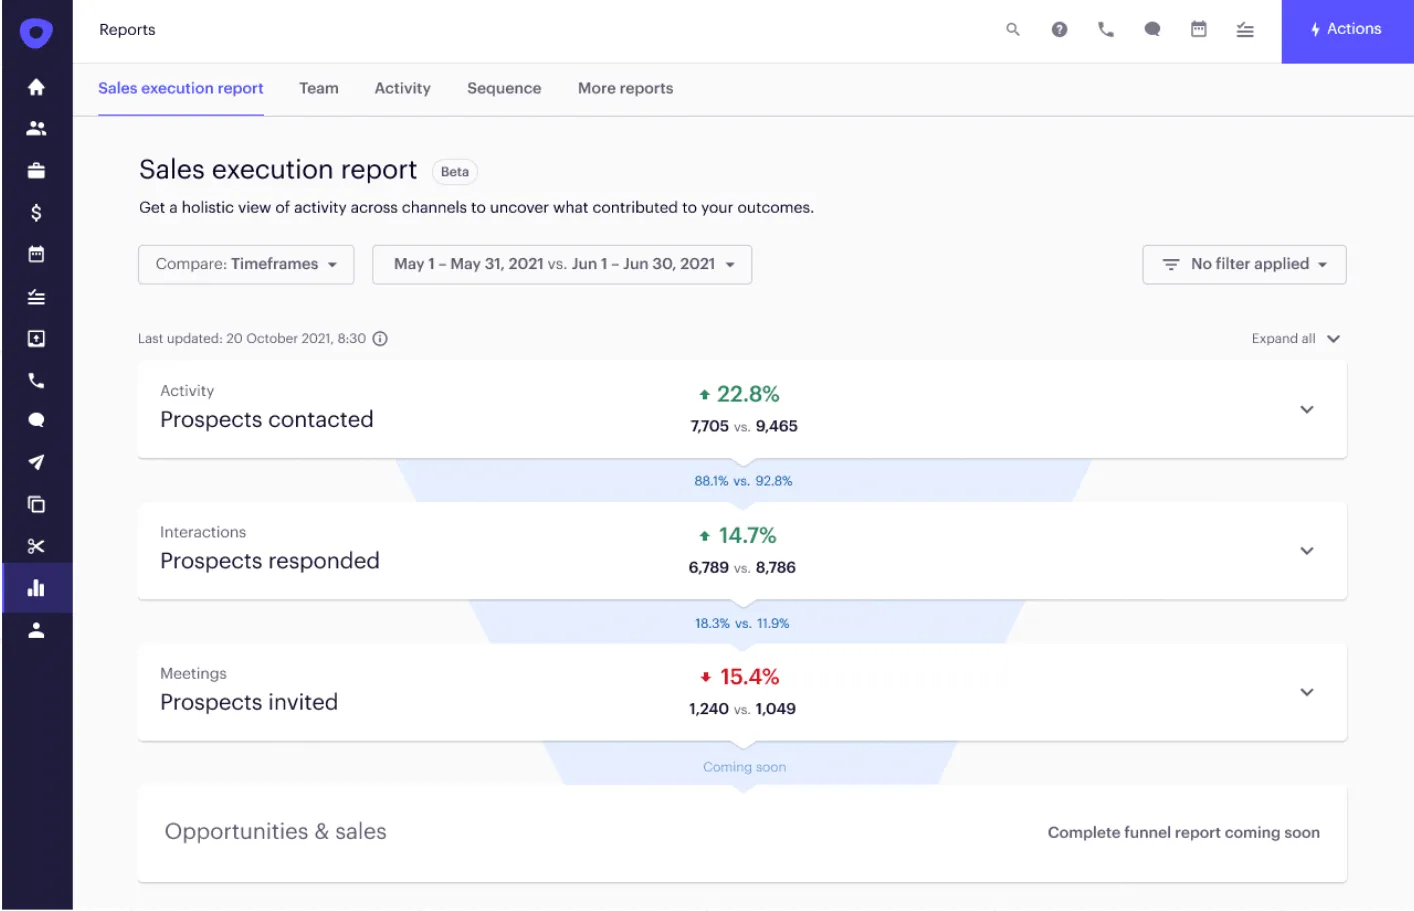 Sales execution report detail